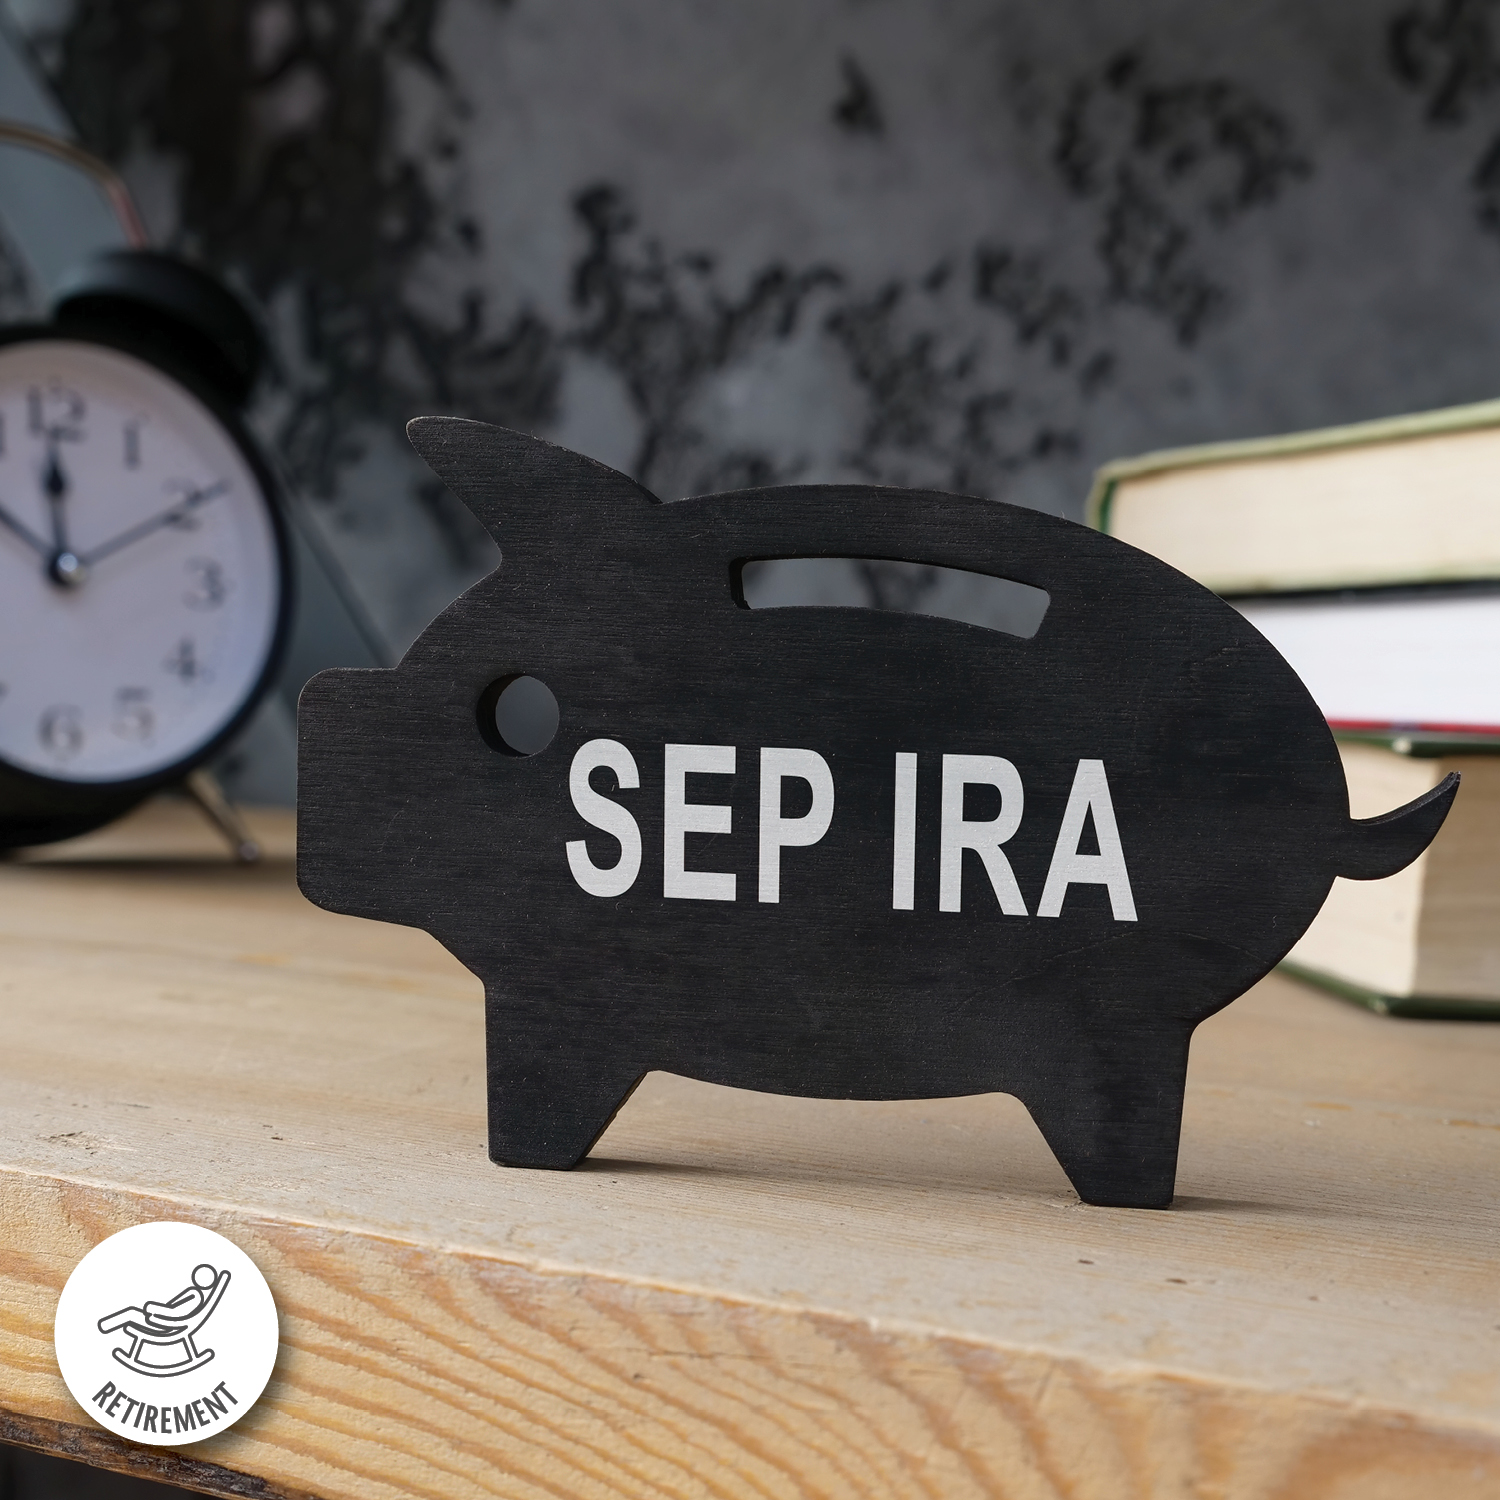 Retirement Primer: All You Need to Know About SEP IRAs